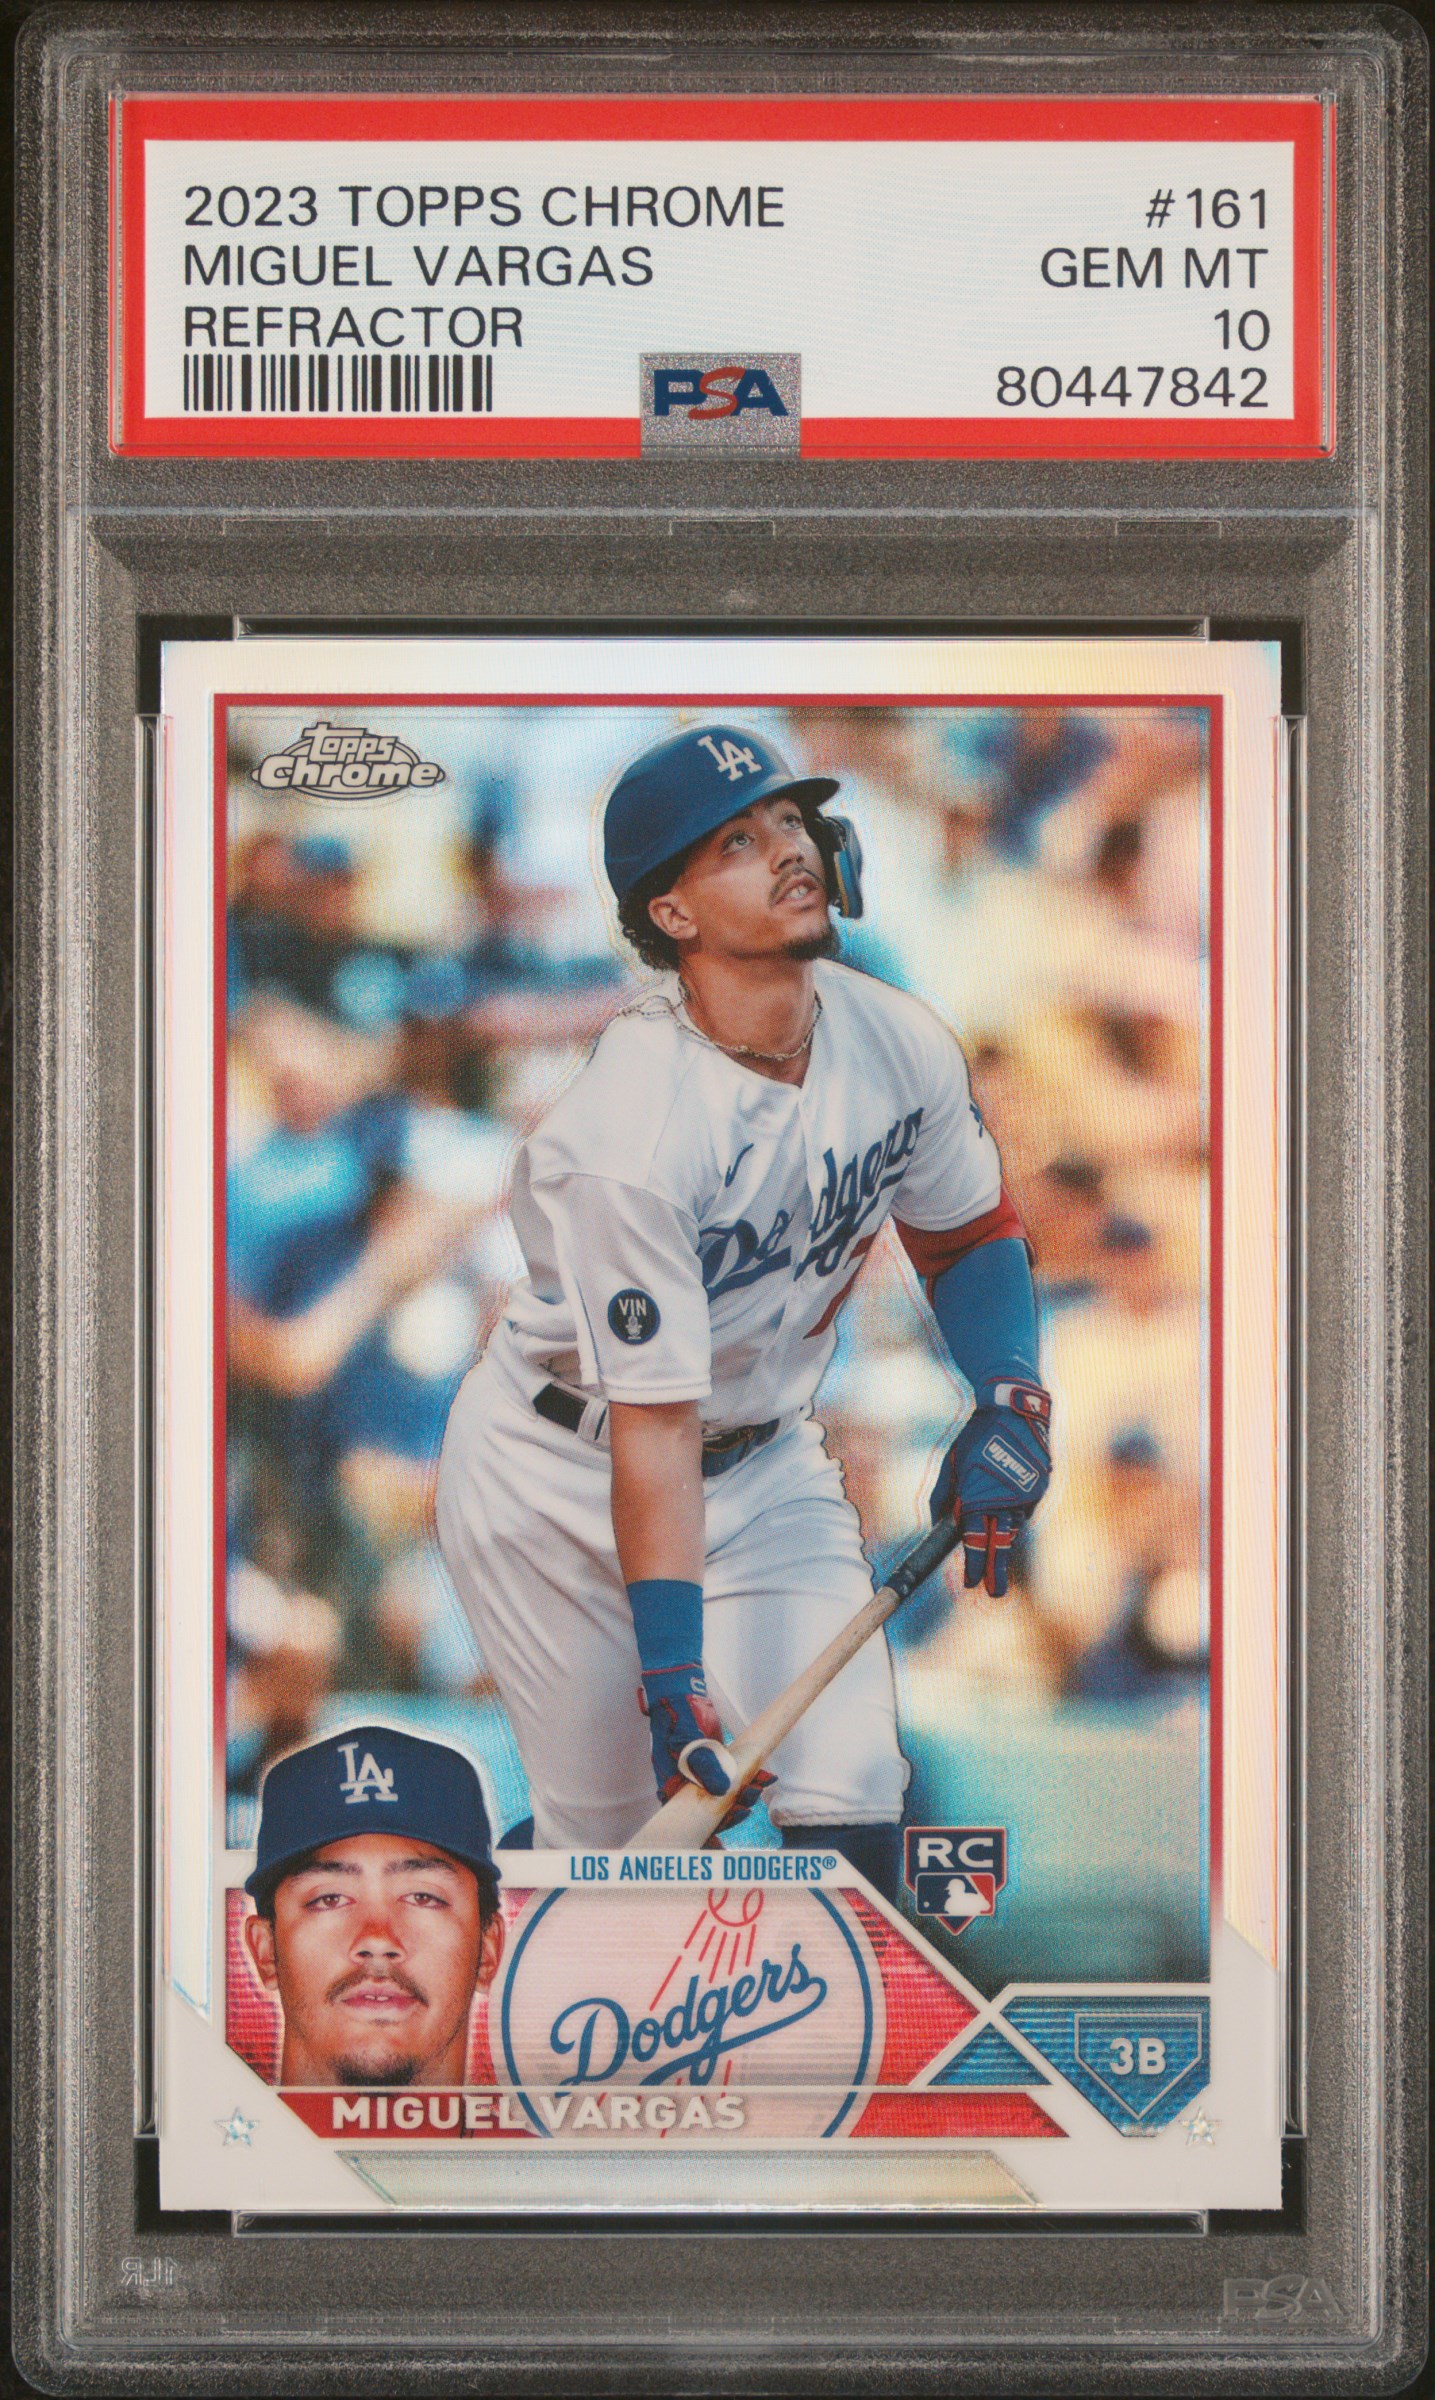 2023 Topps Chrome Refractor #161 Miguel Vargas PSA 10